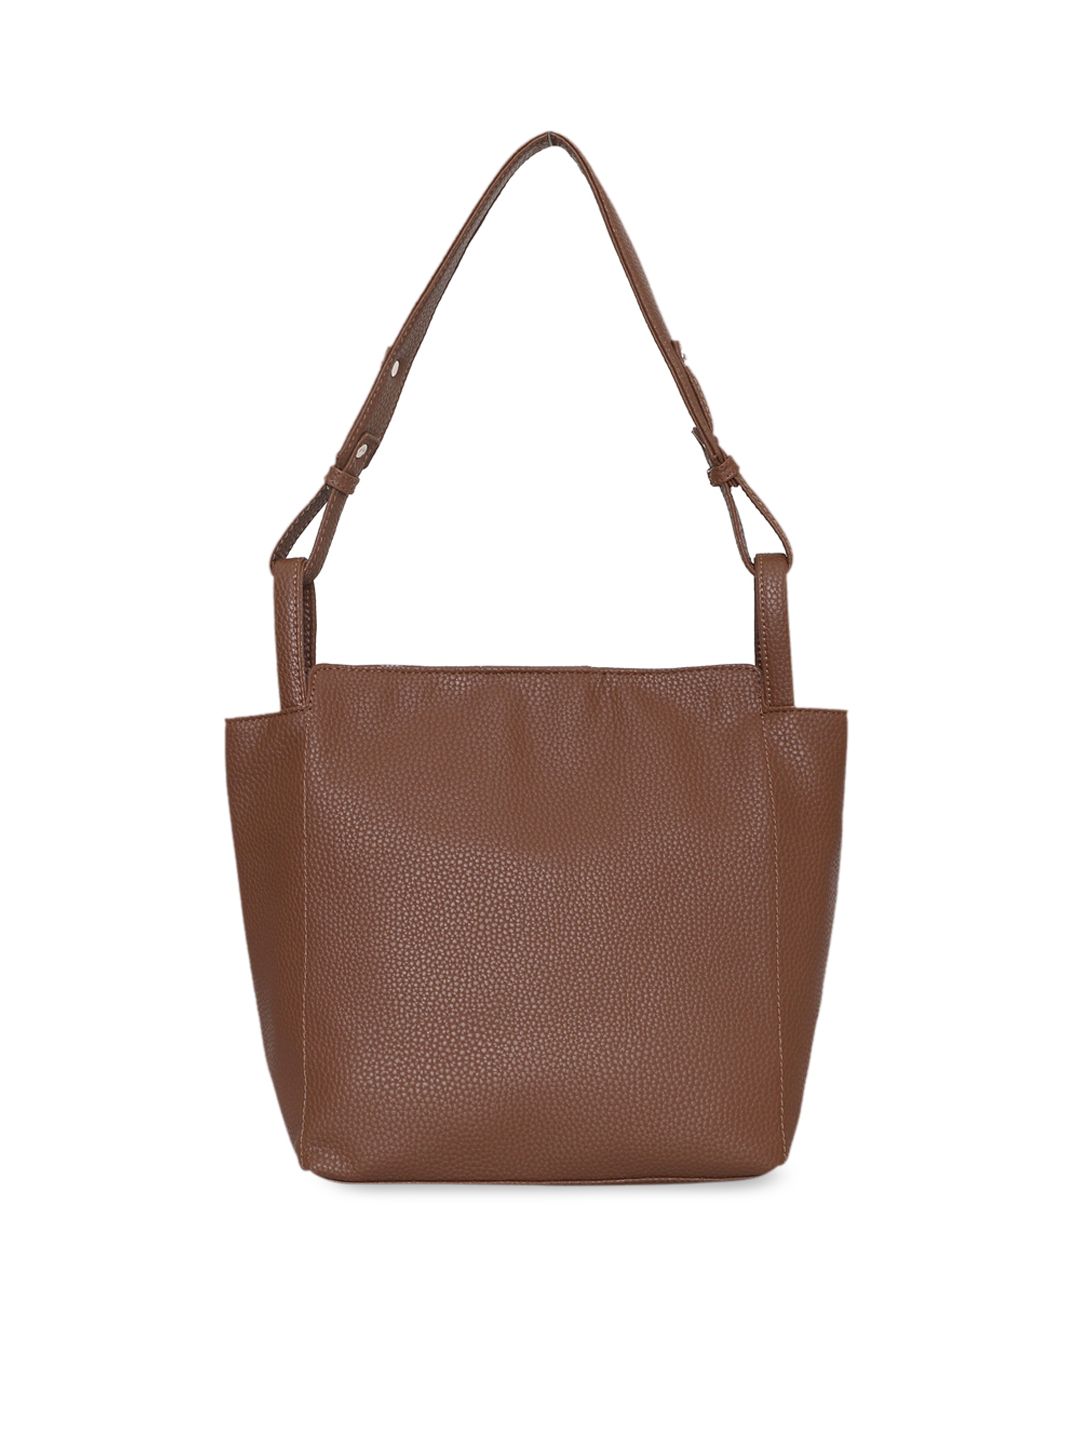 Toteteca Woman Brown Textured PU Structured Shoulder Bag Price in India